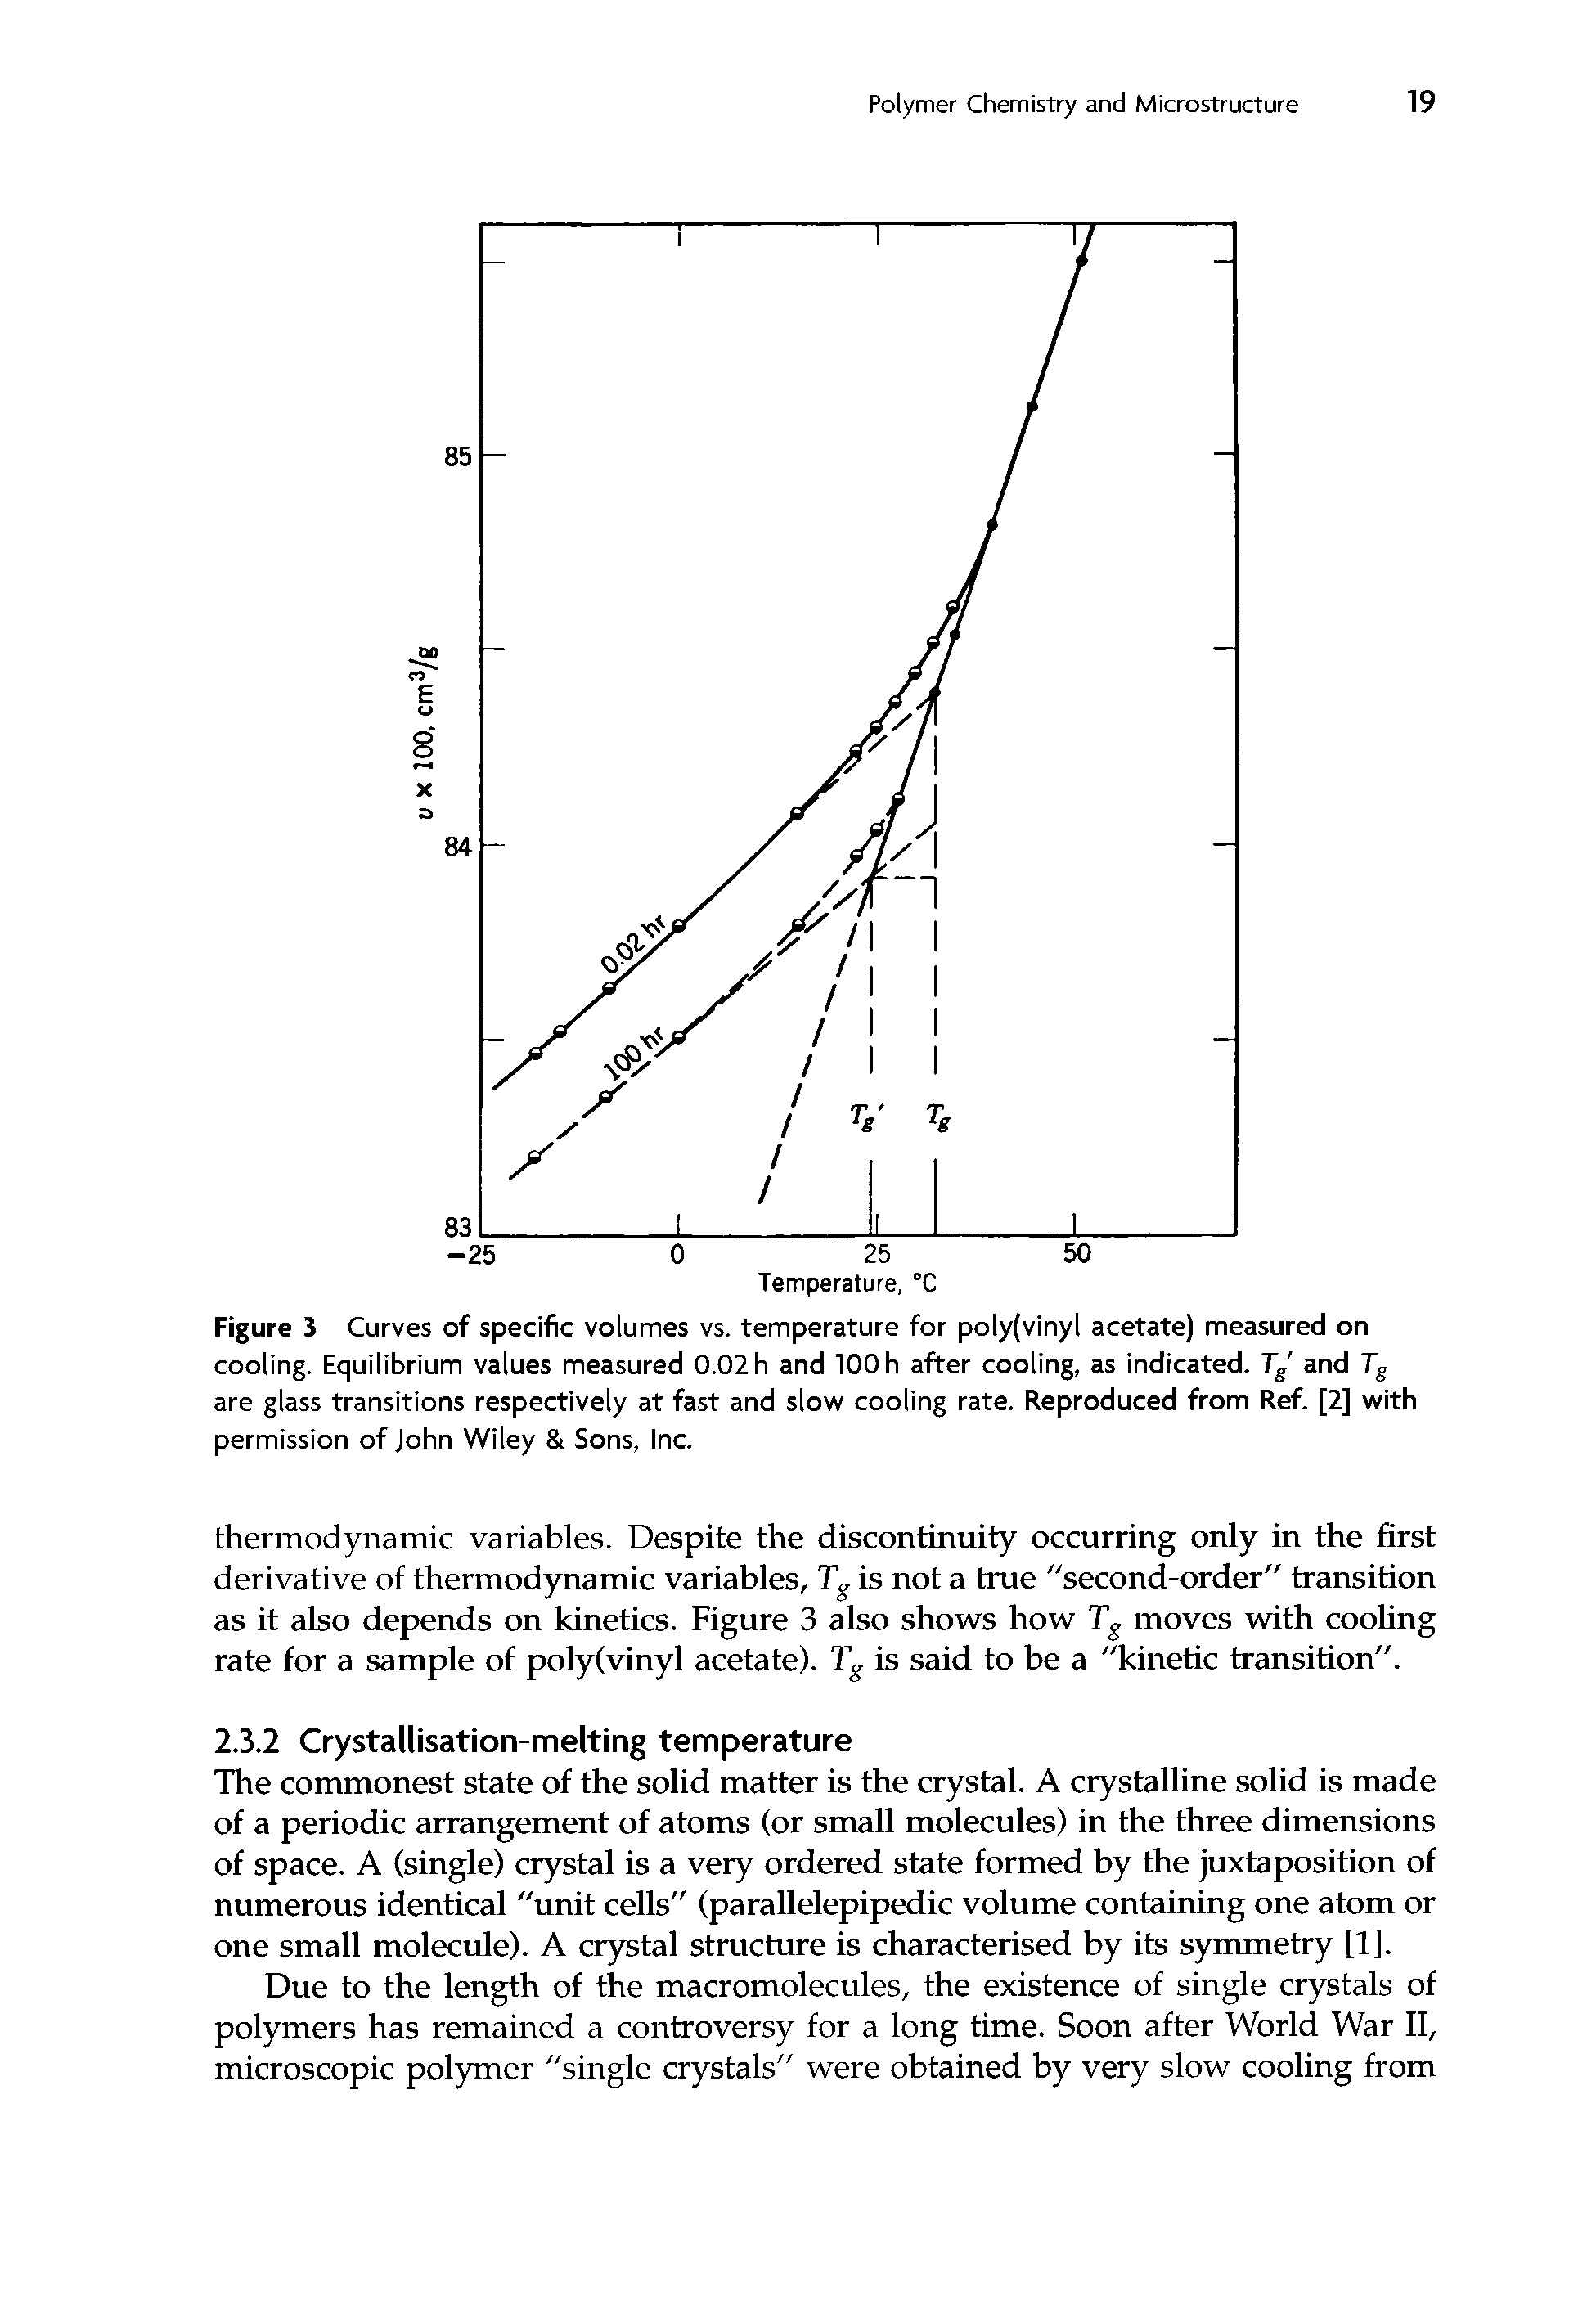 Figure 3 Curves of specific volumes vs. temperature for poly(vinyl acetate) measured on cooling. Equilibrium values measured 0.02 h and 100 h after cooling, as indicated. Tg and Tg are glass transitions respectively at fast and slow cooling rate. Reproduced from Ref. [2] with permission of John Wiley Sons, Inc.